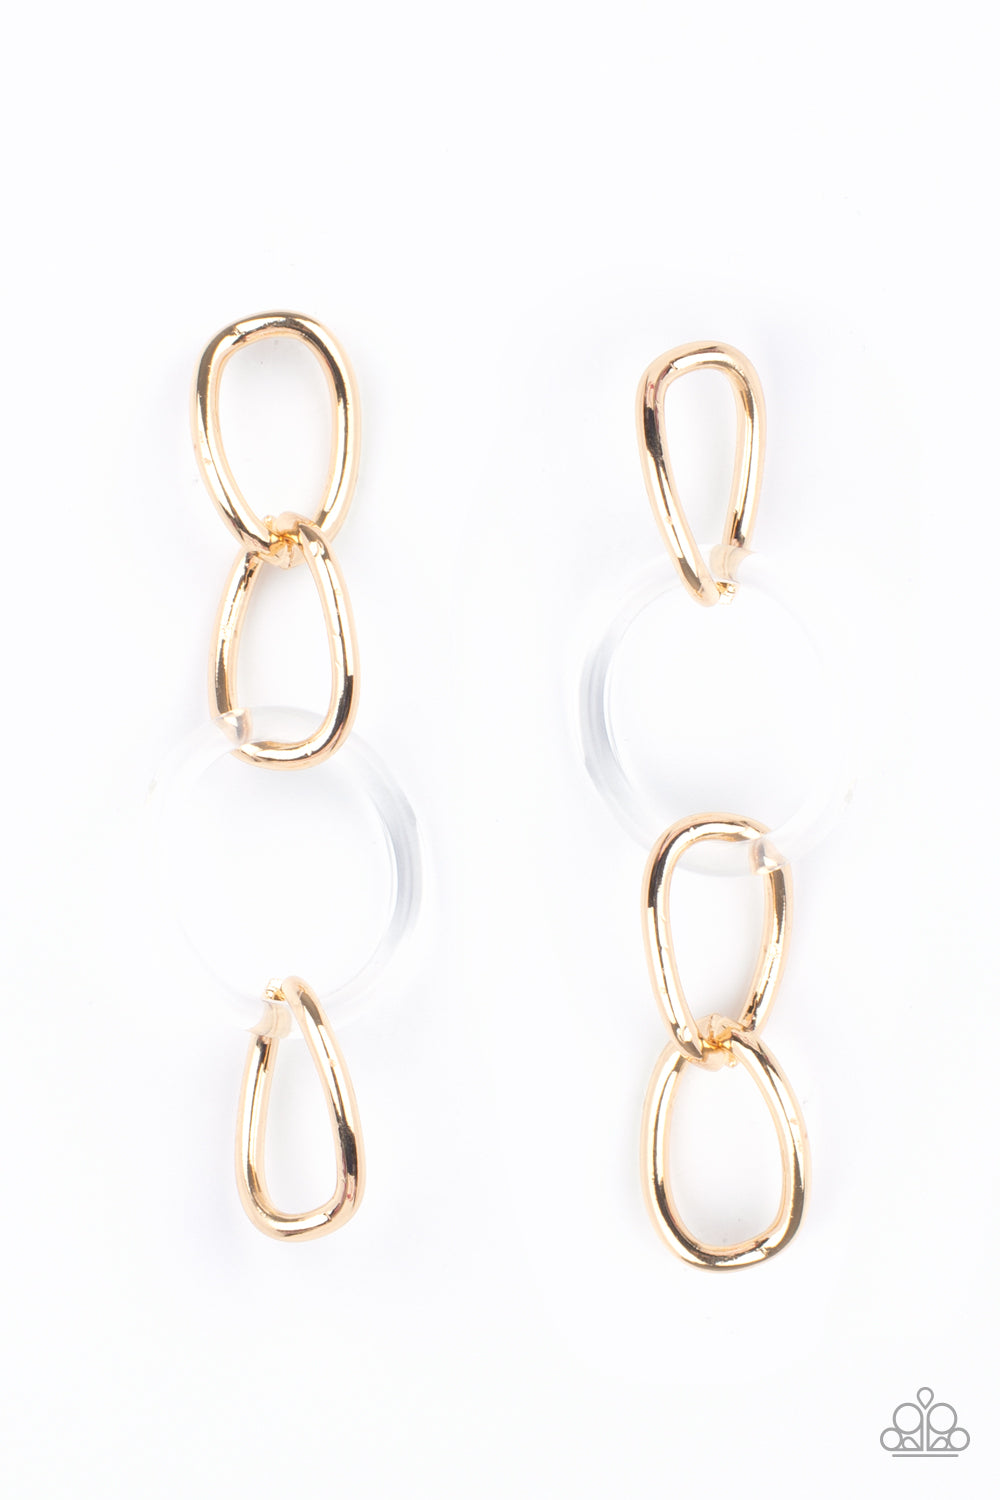 Talk in Circles - Gold Earrings bright gold oversized links, interrupted by a single large clear acrylic ring, fall from the ear in linked succession for an on-trend fashion statement. Earring attaches to a standard post fitting.  Sold as one pair of post earrings.  Paparazzi Jewelry is lead and nickel free so it's perfect for sensitive skin too!